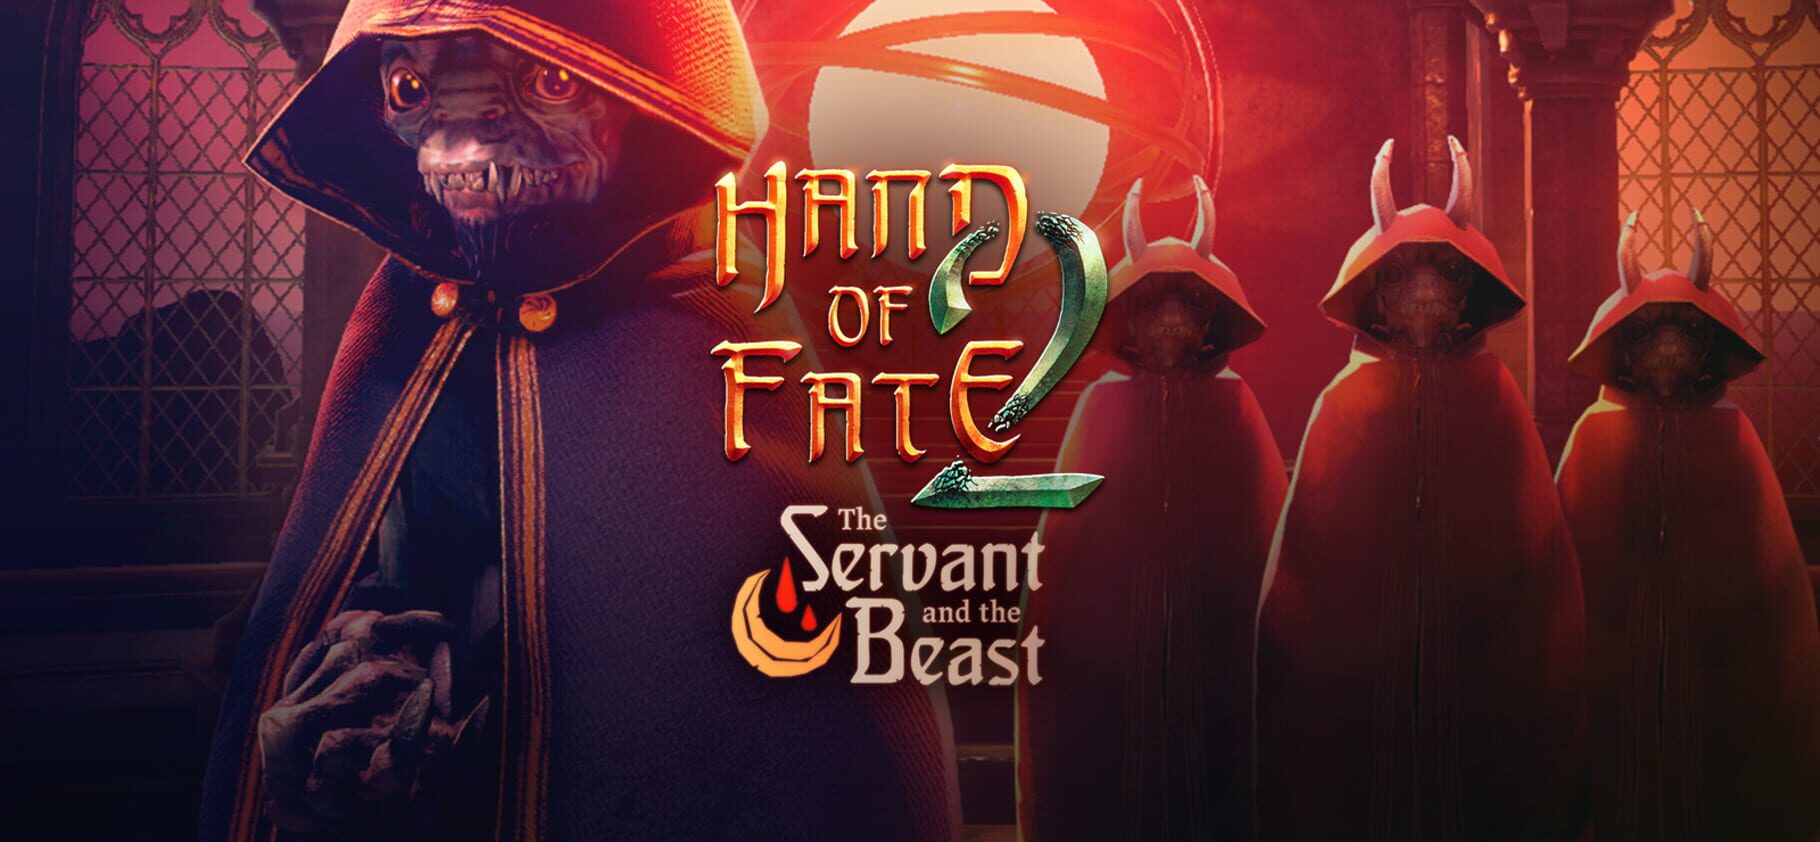 Hand of Fate 2: The Servant and the Beast artwork